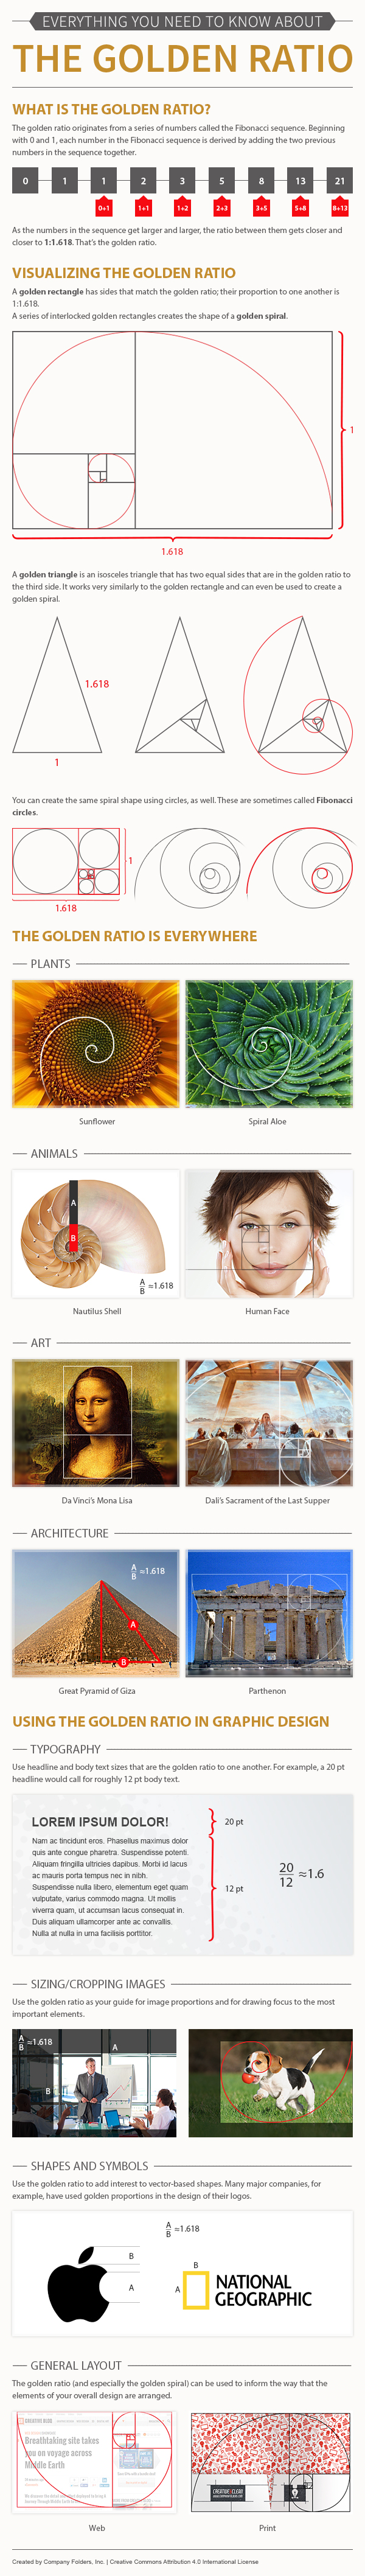 Everything You Need to Know About the Golden Ratio